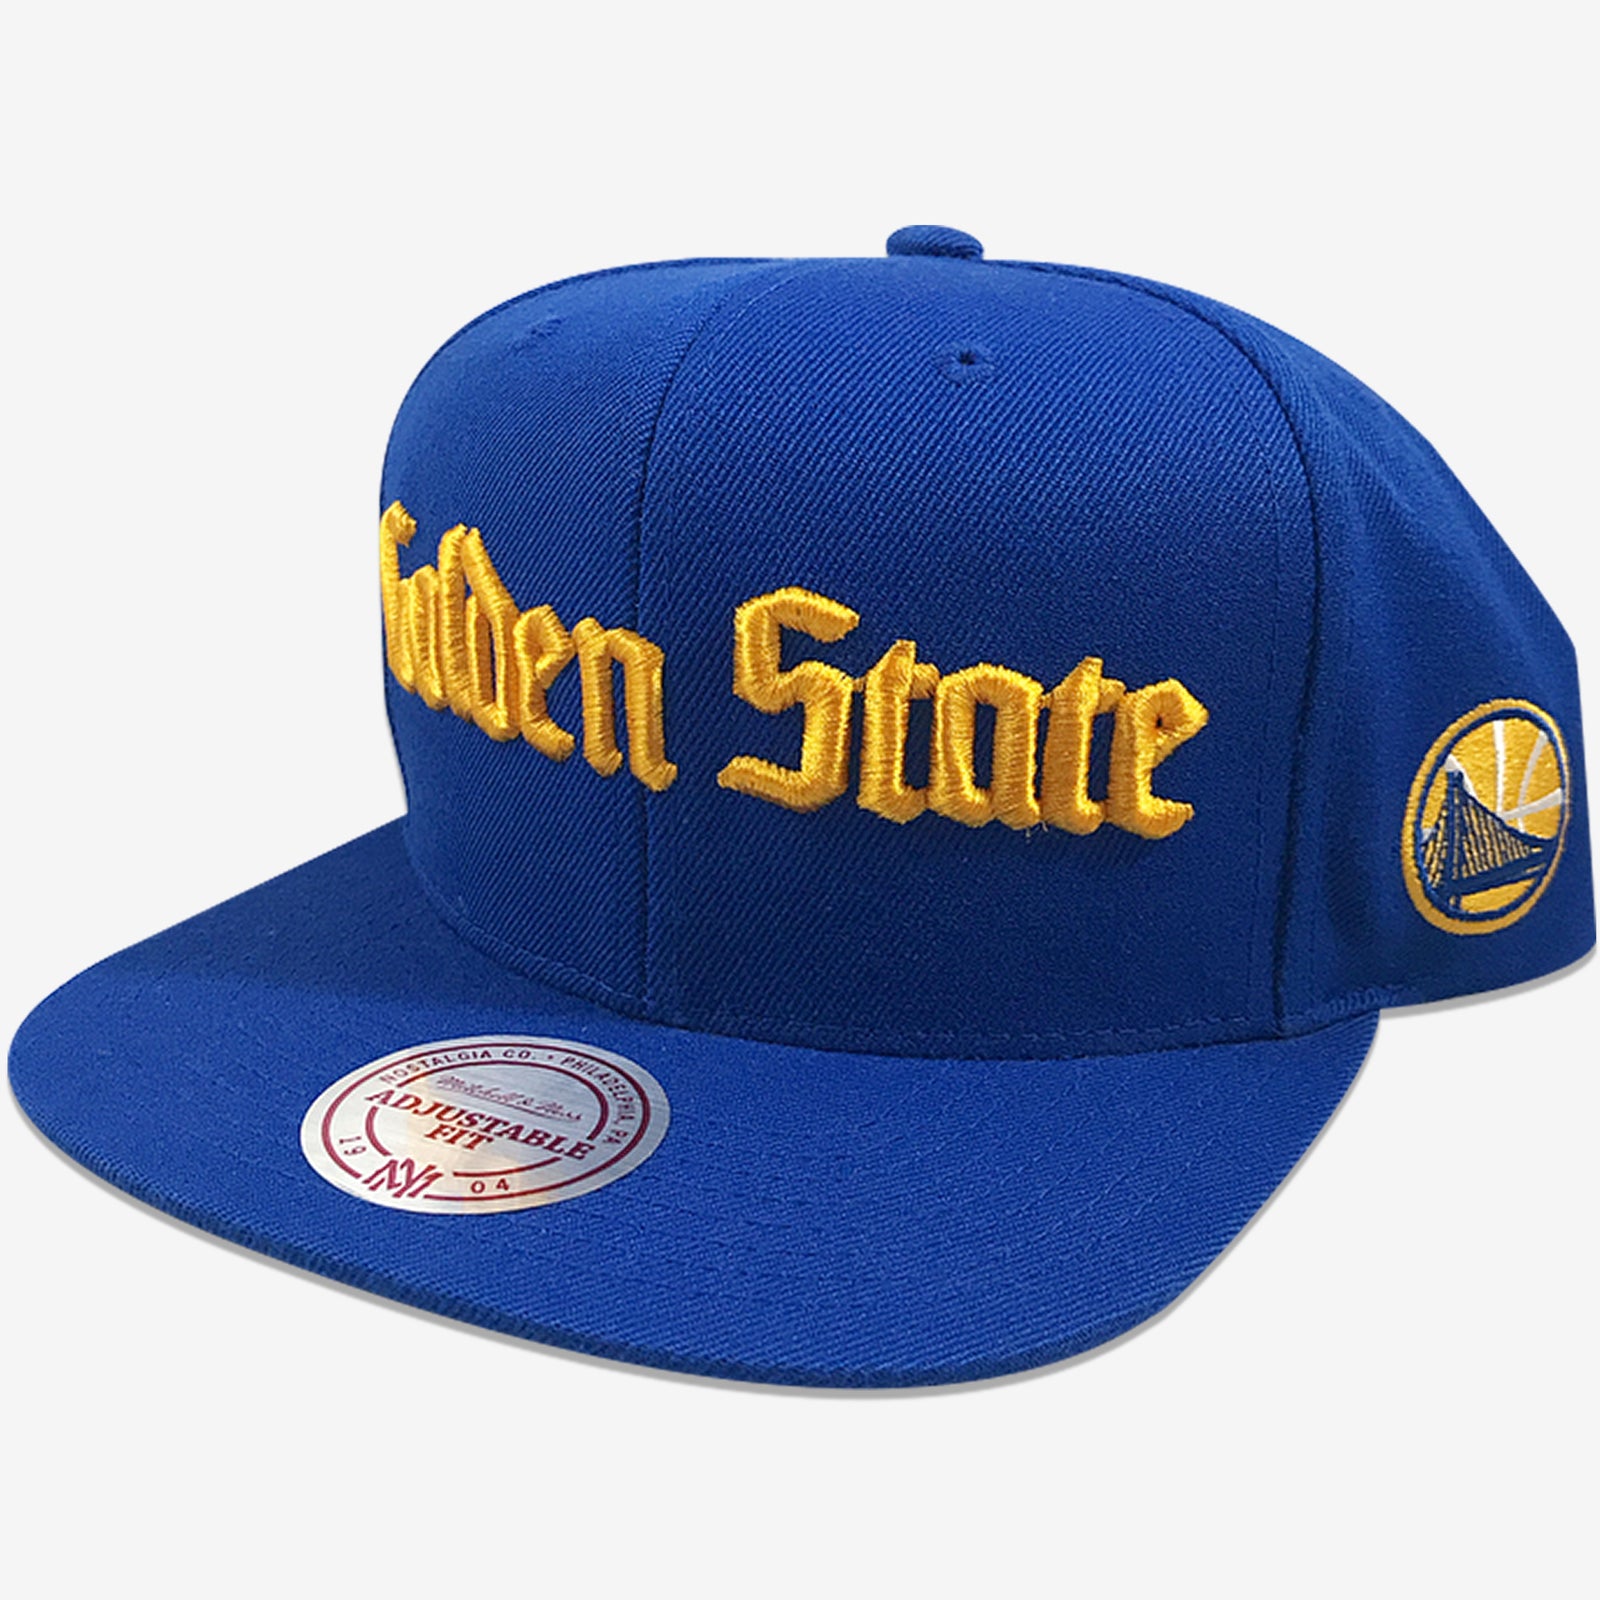 Golden State Warriors City Names Mitchell & Ness Snapback